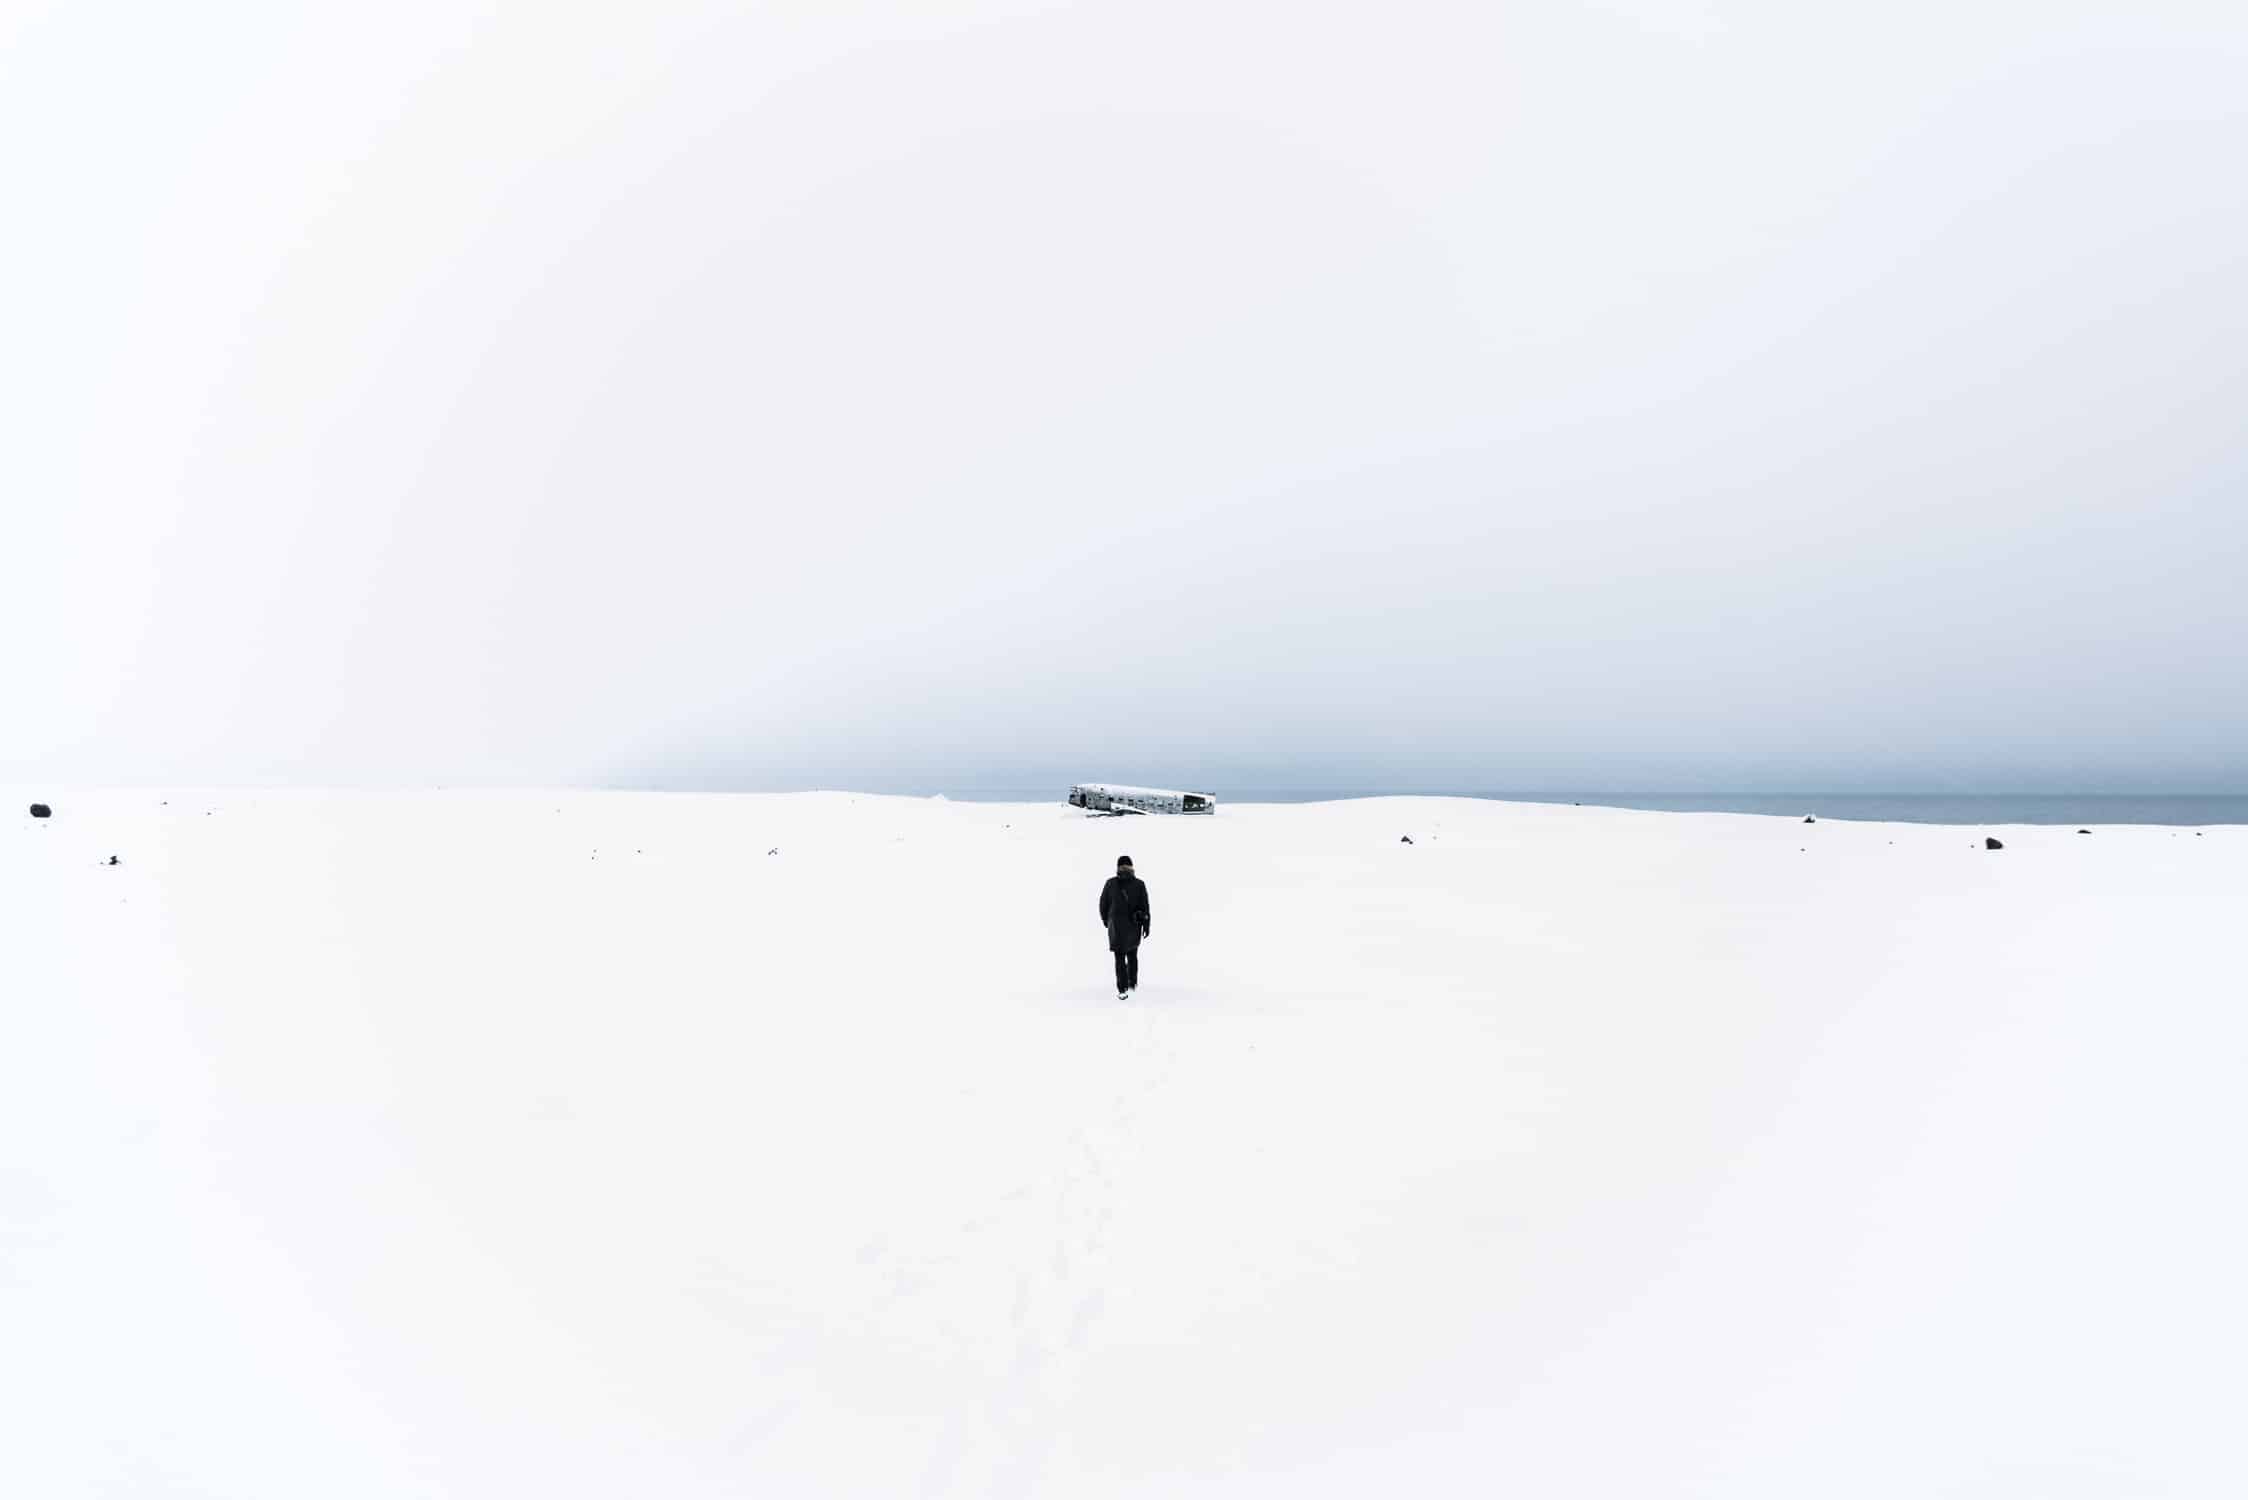 North tells the dramatic story of a polar expedition and explores the landscapes of the cold north of Iceland. By Michael Schauer